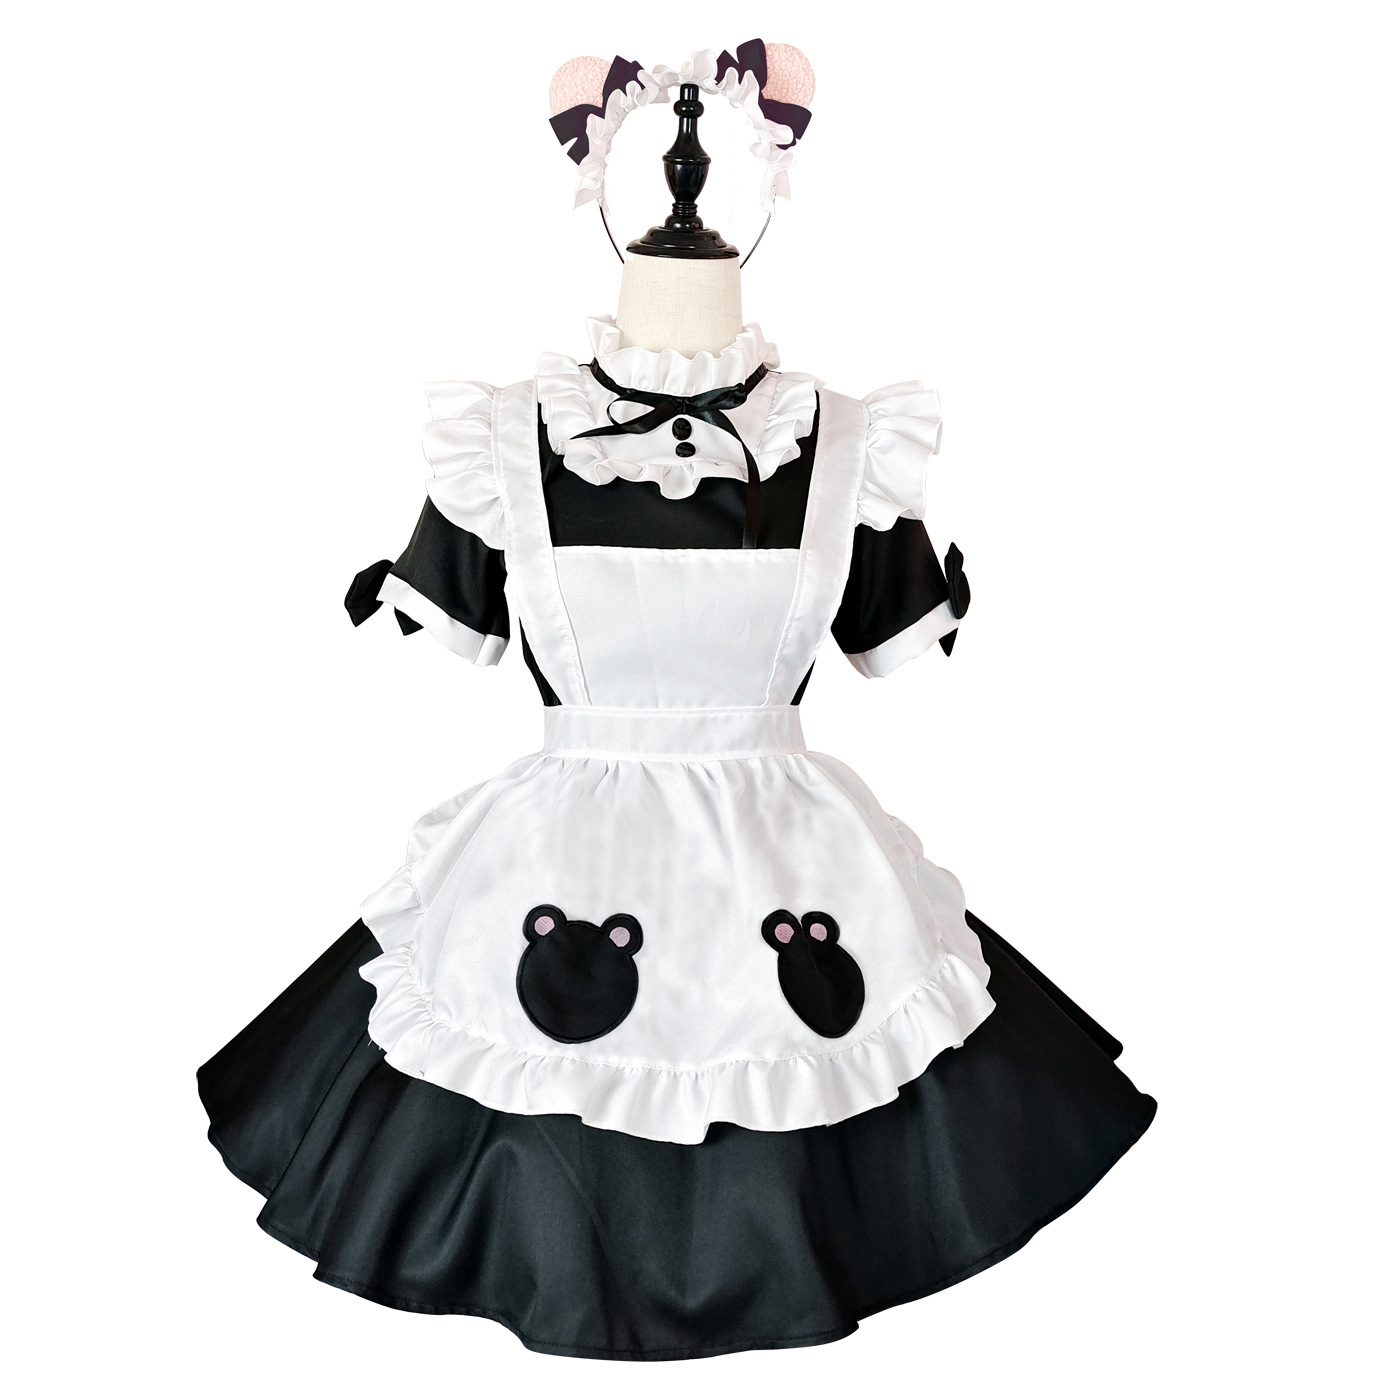 8077 maid dress cat maid costume anime cosplay costume cute and funny  |TospinoMall online shopping platform in GhanaTospinoMall Ghana online  shopping